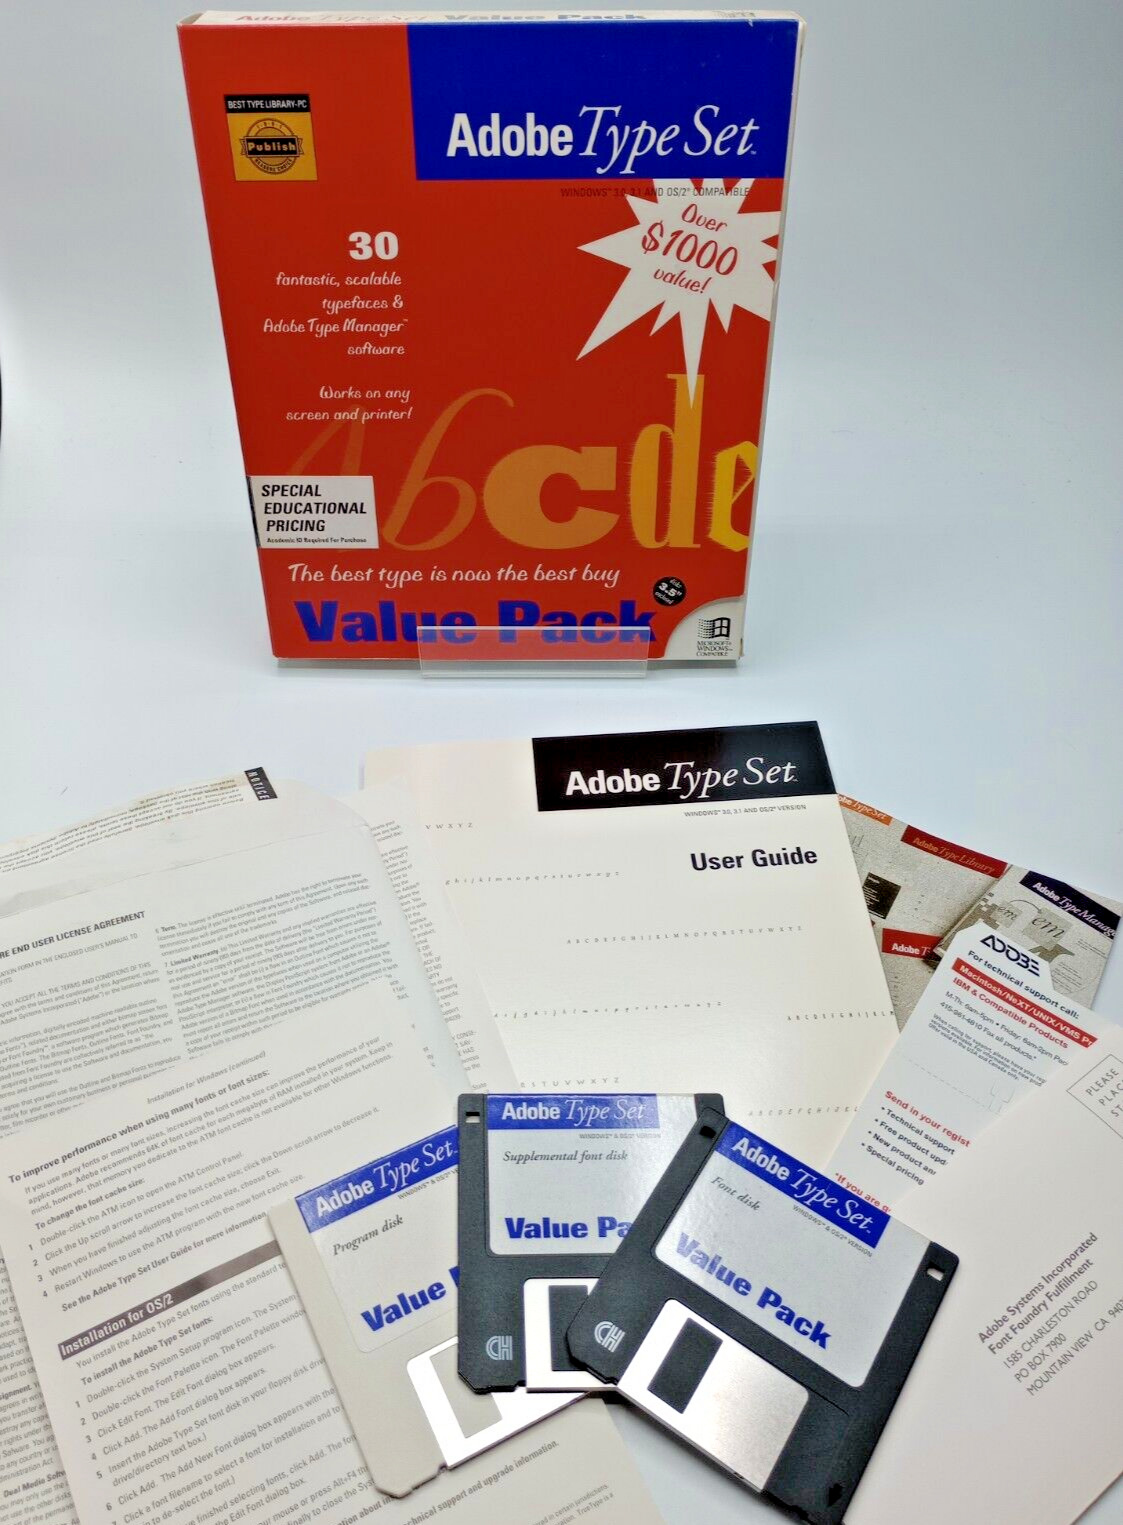 Adobe Type Set Value Pack for Windows 3.0, Win 3.1 and OS/2 -  Complete in Box